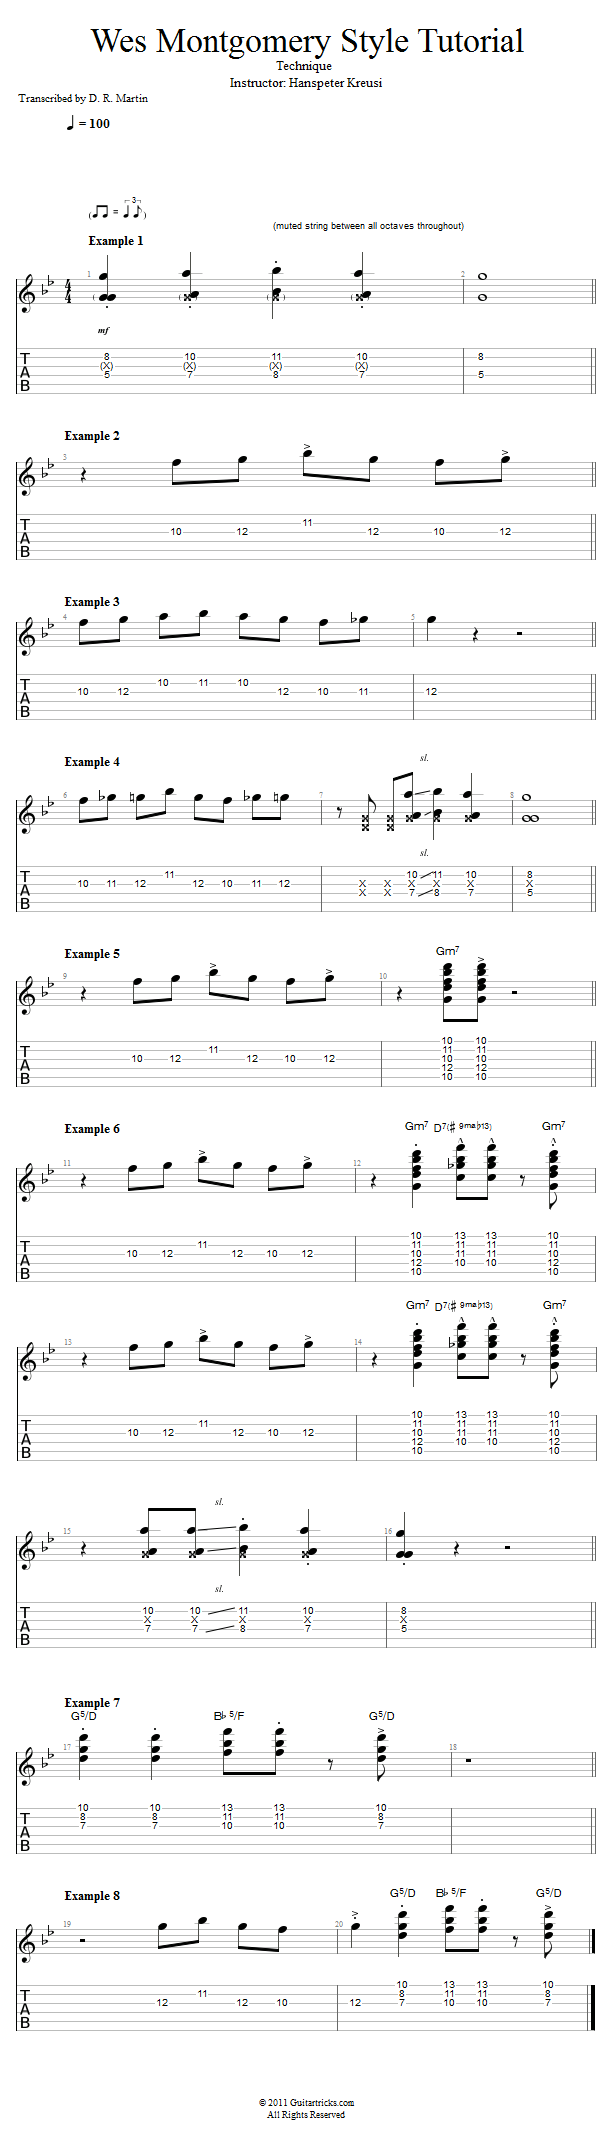 Wes Montgomery Style: Technique song notation